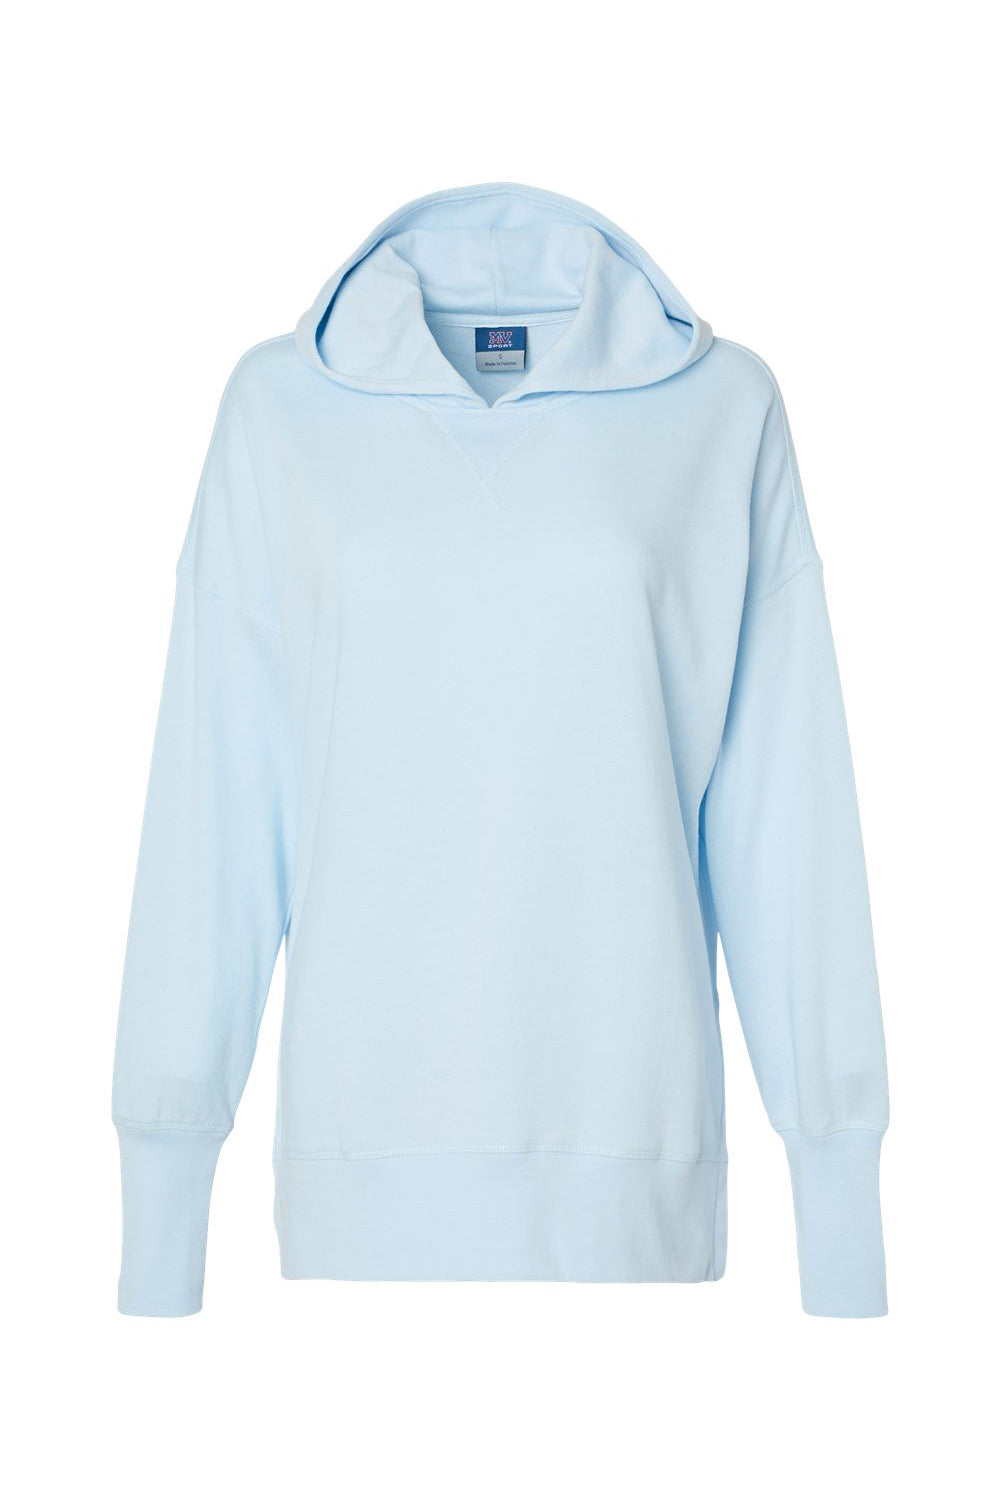 MV Sport W23720 Womens French Terry Hooded Sweatshirt Hoodie Arctic Blue Flat Front